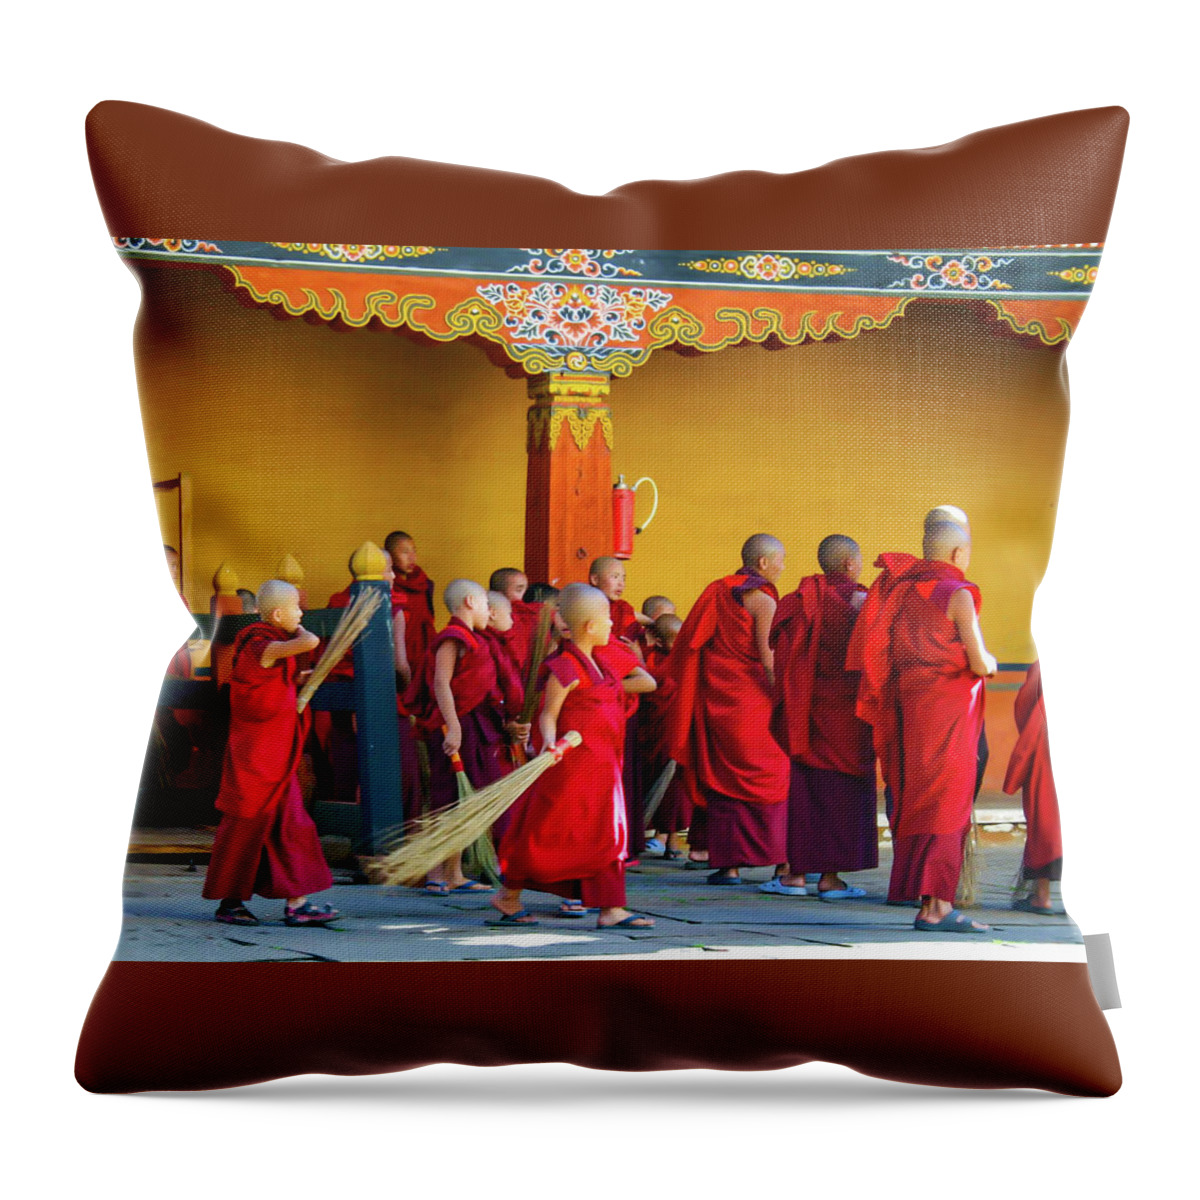 School Throw Pillow featuring the photograph Boy Monks by Leslie Struxness